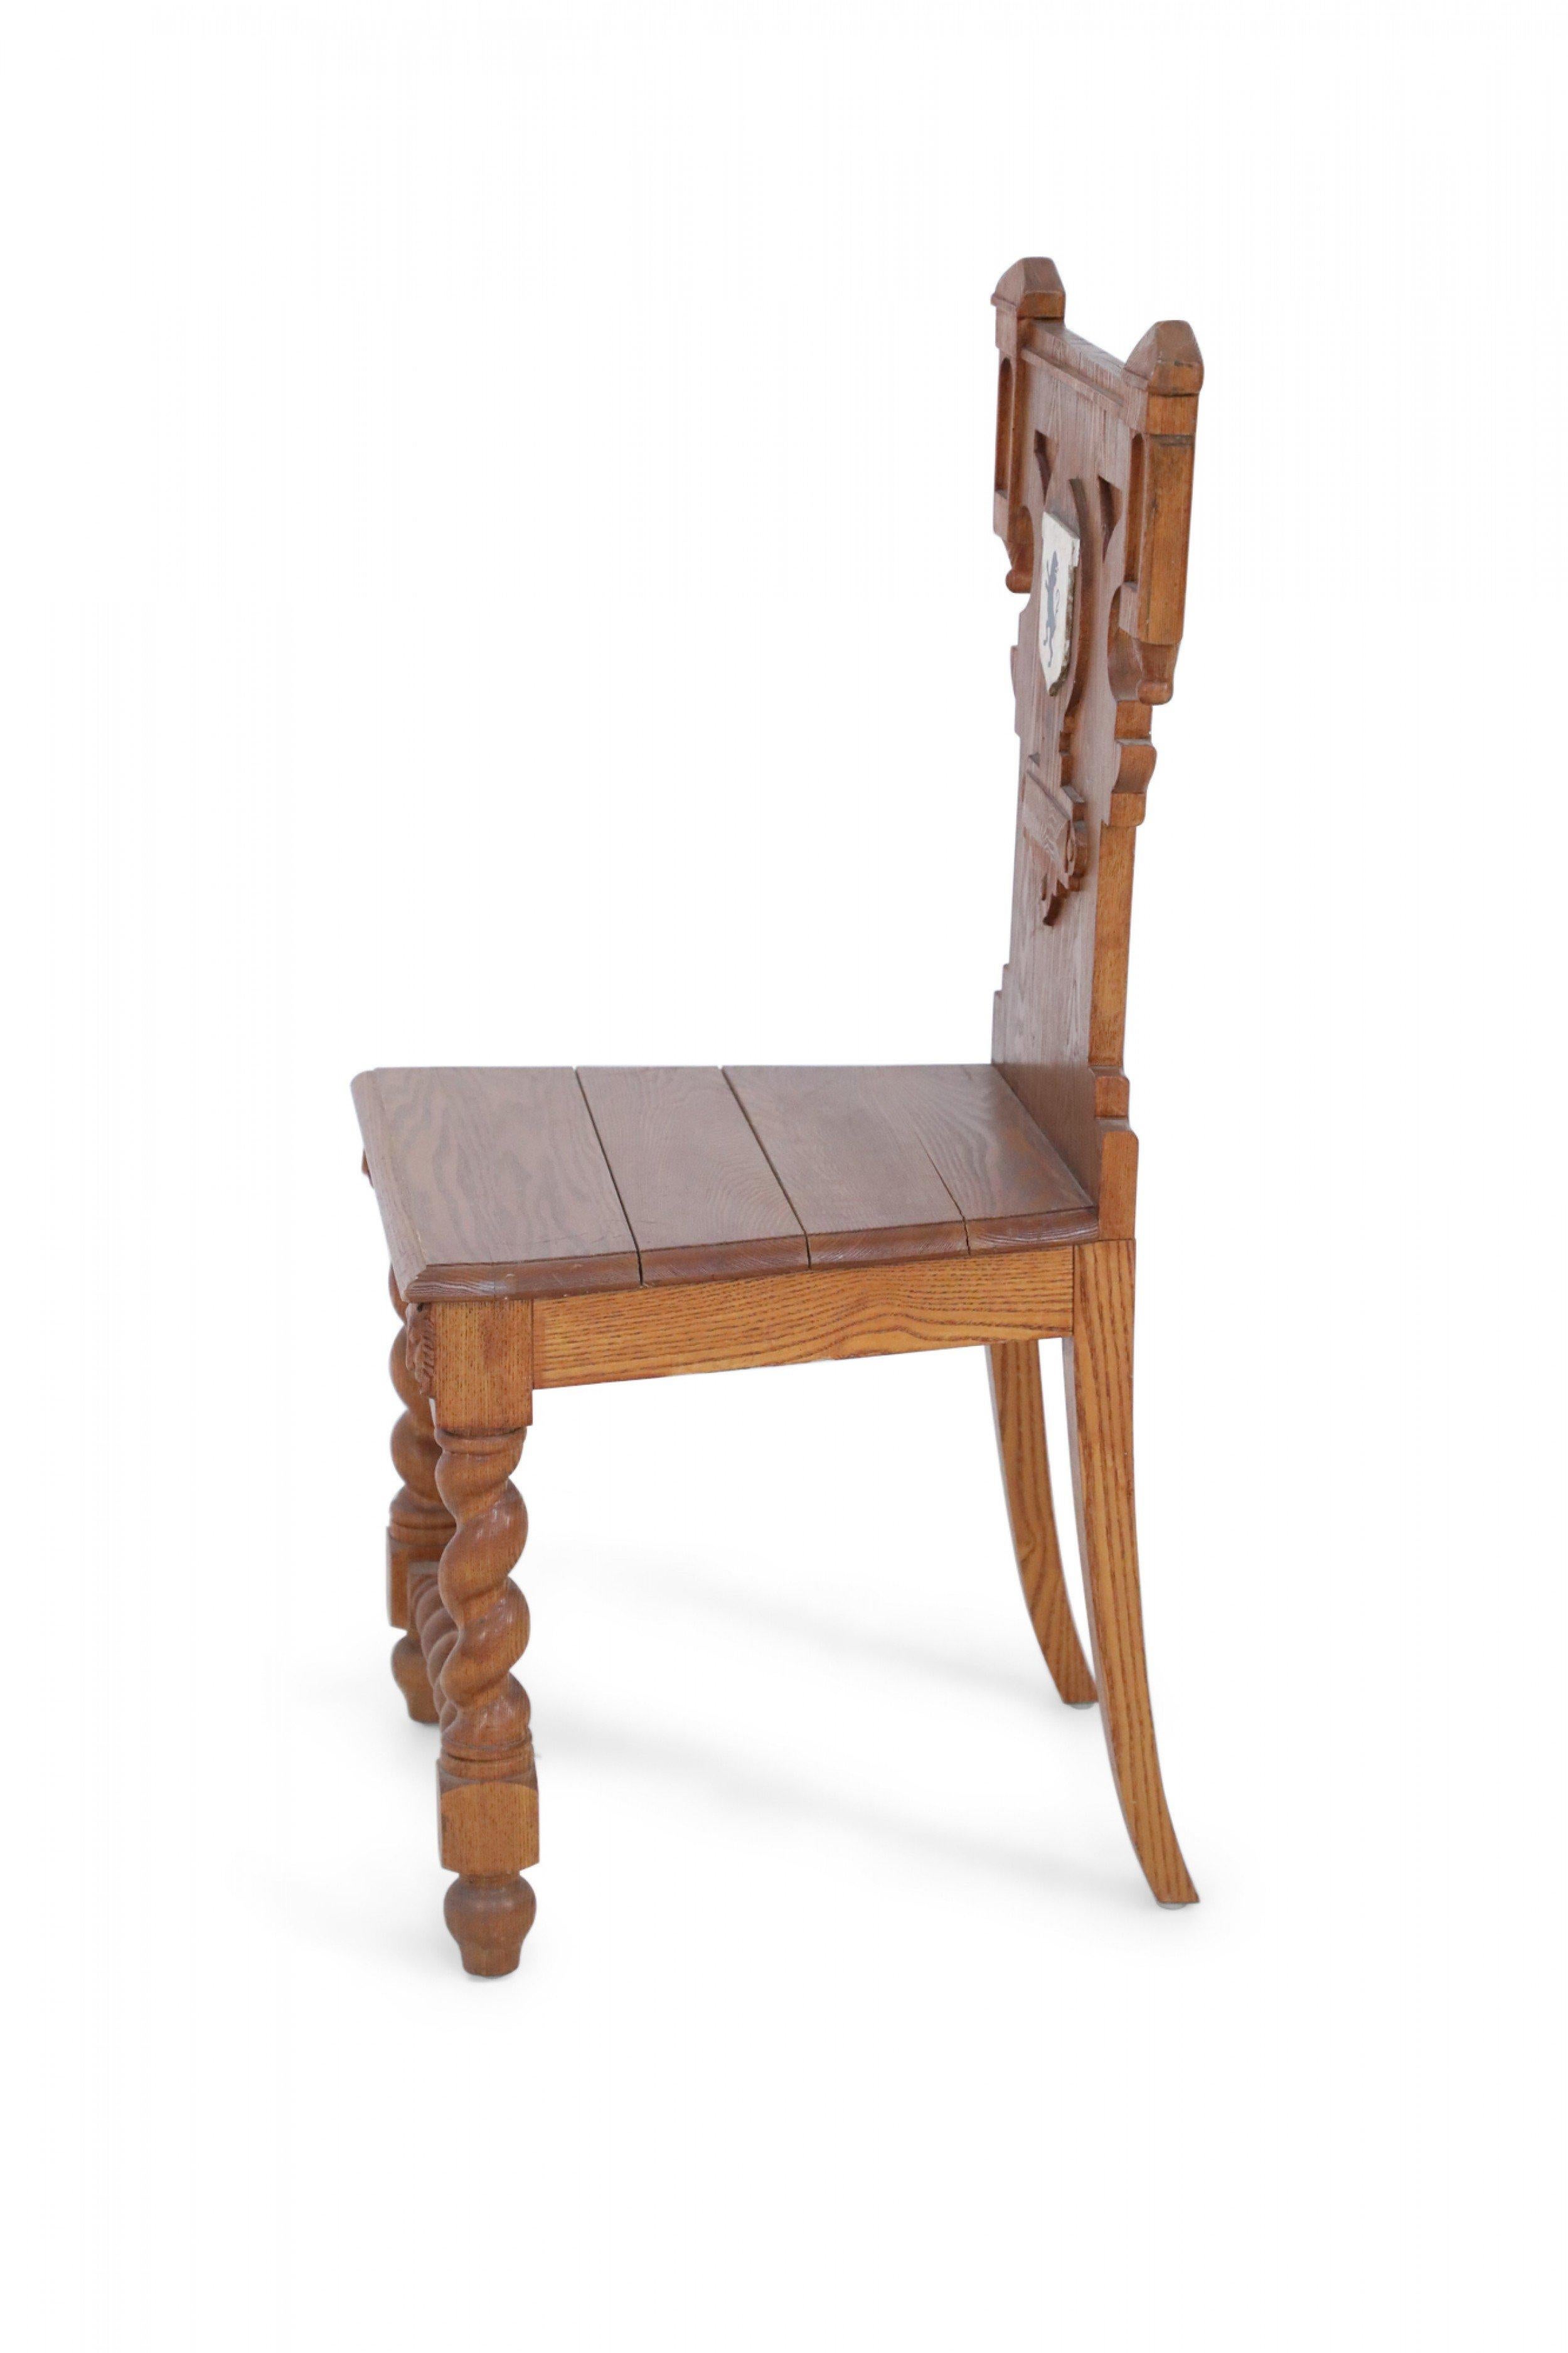 Italian Renaissance-style carved wooden chair with spiral turned front legs and stretcher, rear saber legs, and a back featuring a painted white crest with a central black lion.
 